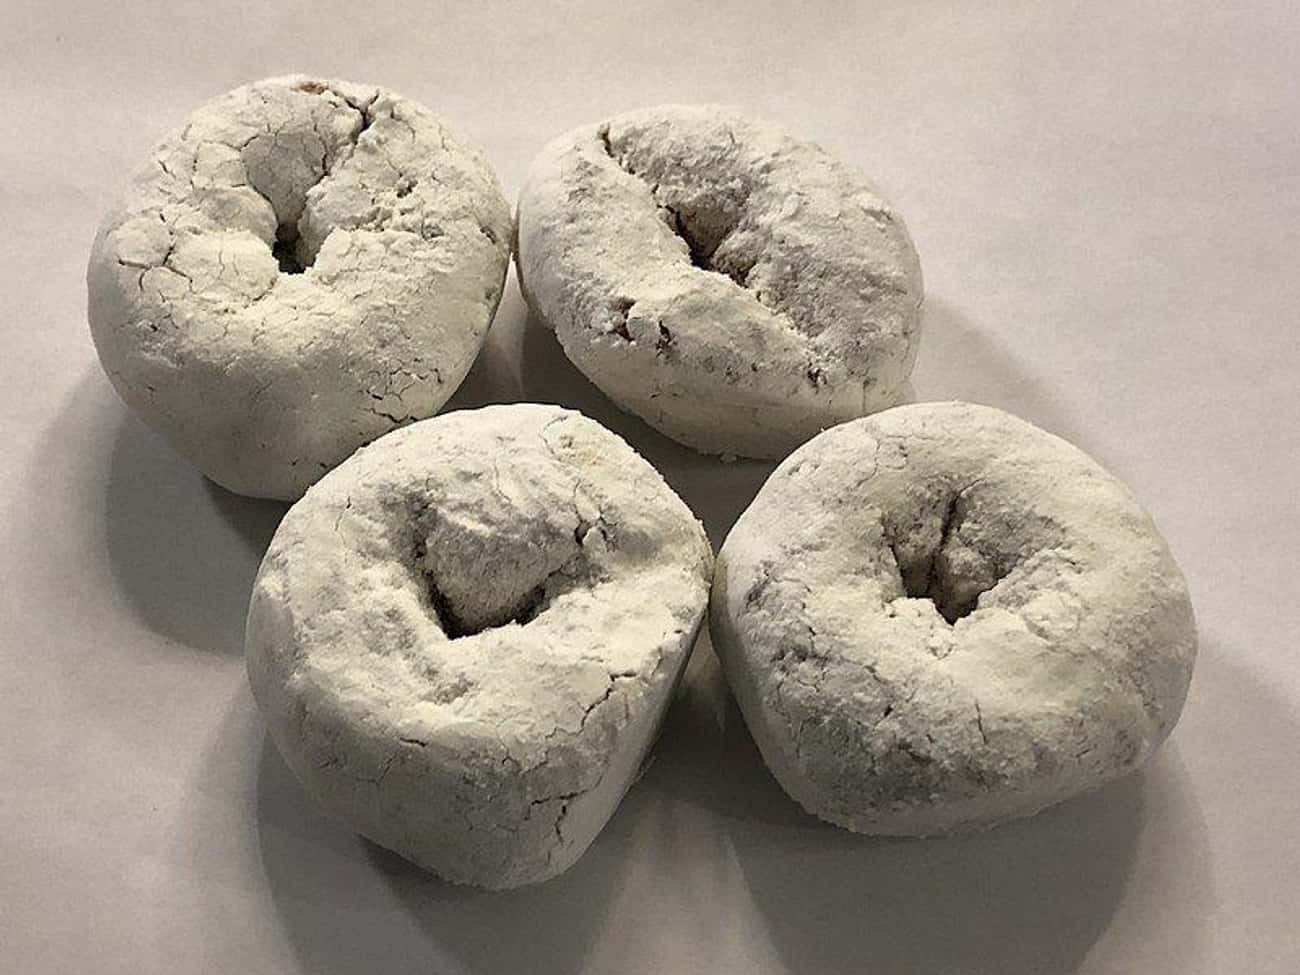 Powdered Doughnuts Can Be Covered In The Same Stuff You'd Find In Paint